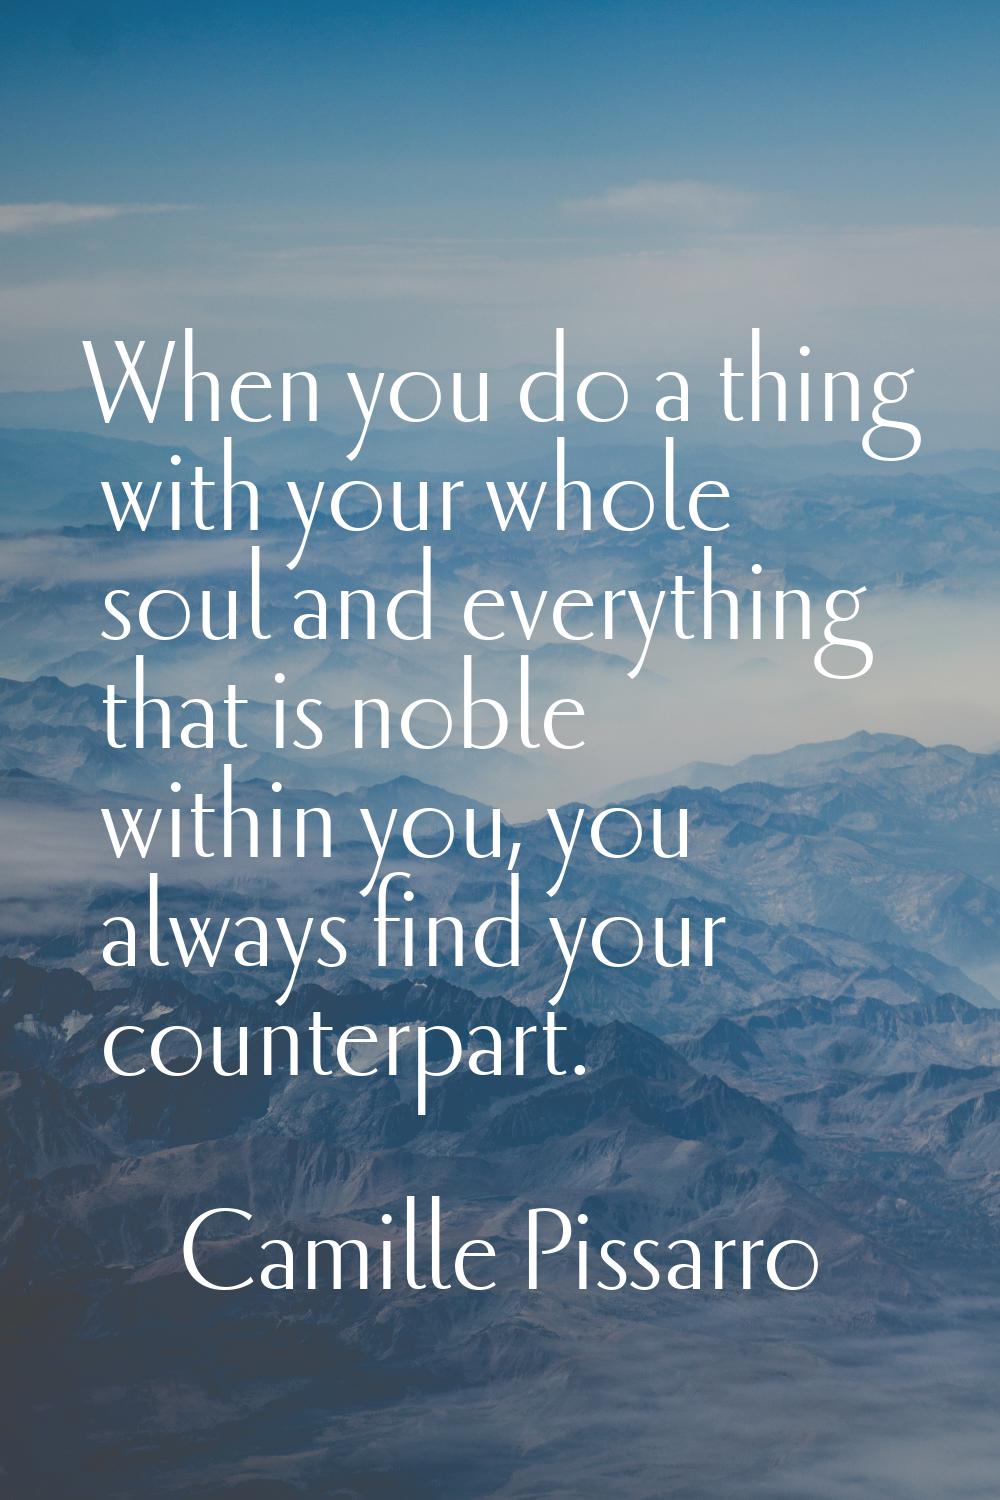 When you do a thing with your whole soul and everything that is noble within you, you always find y